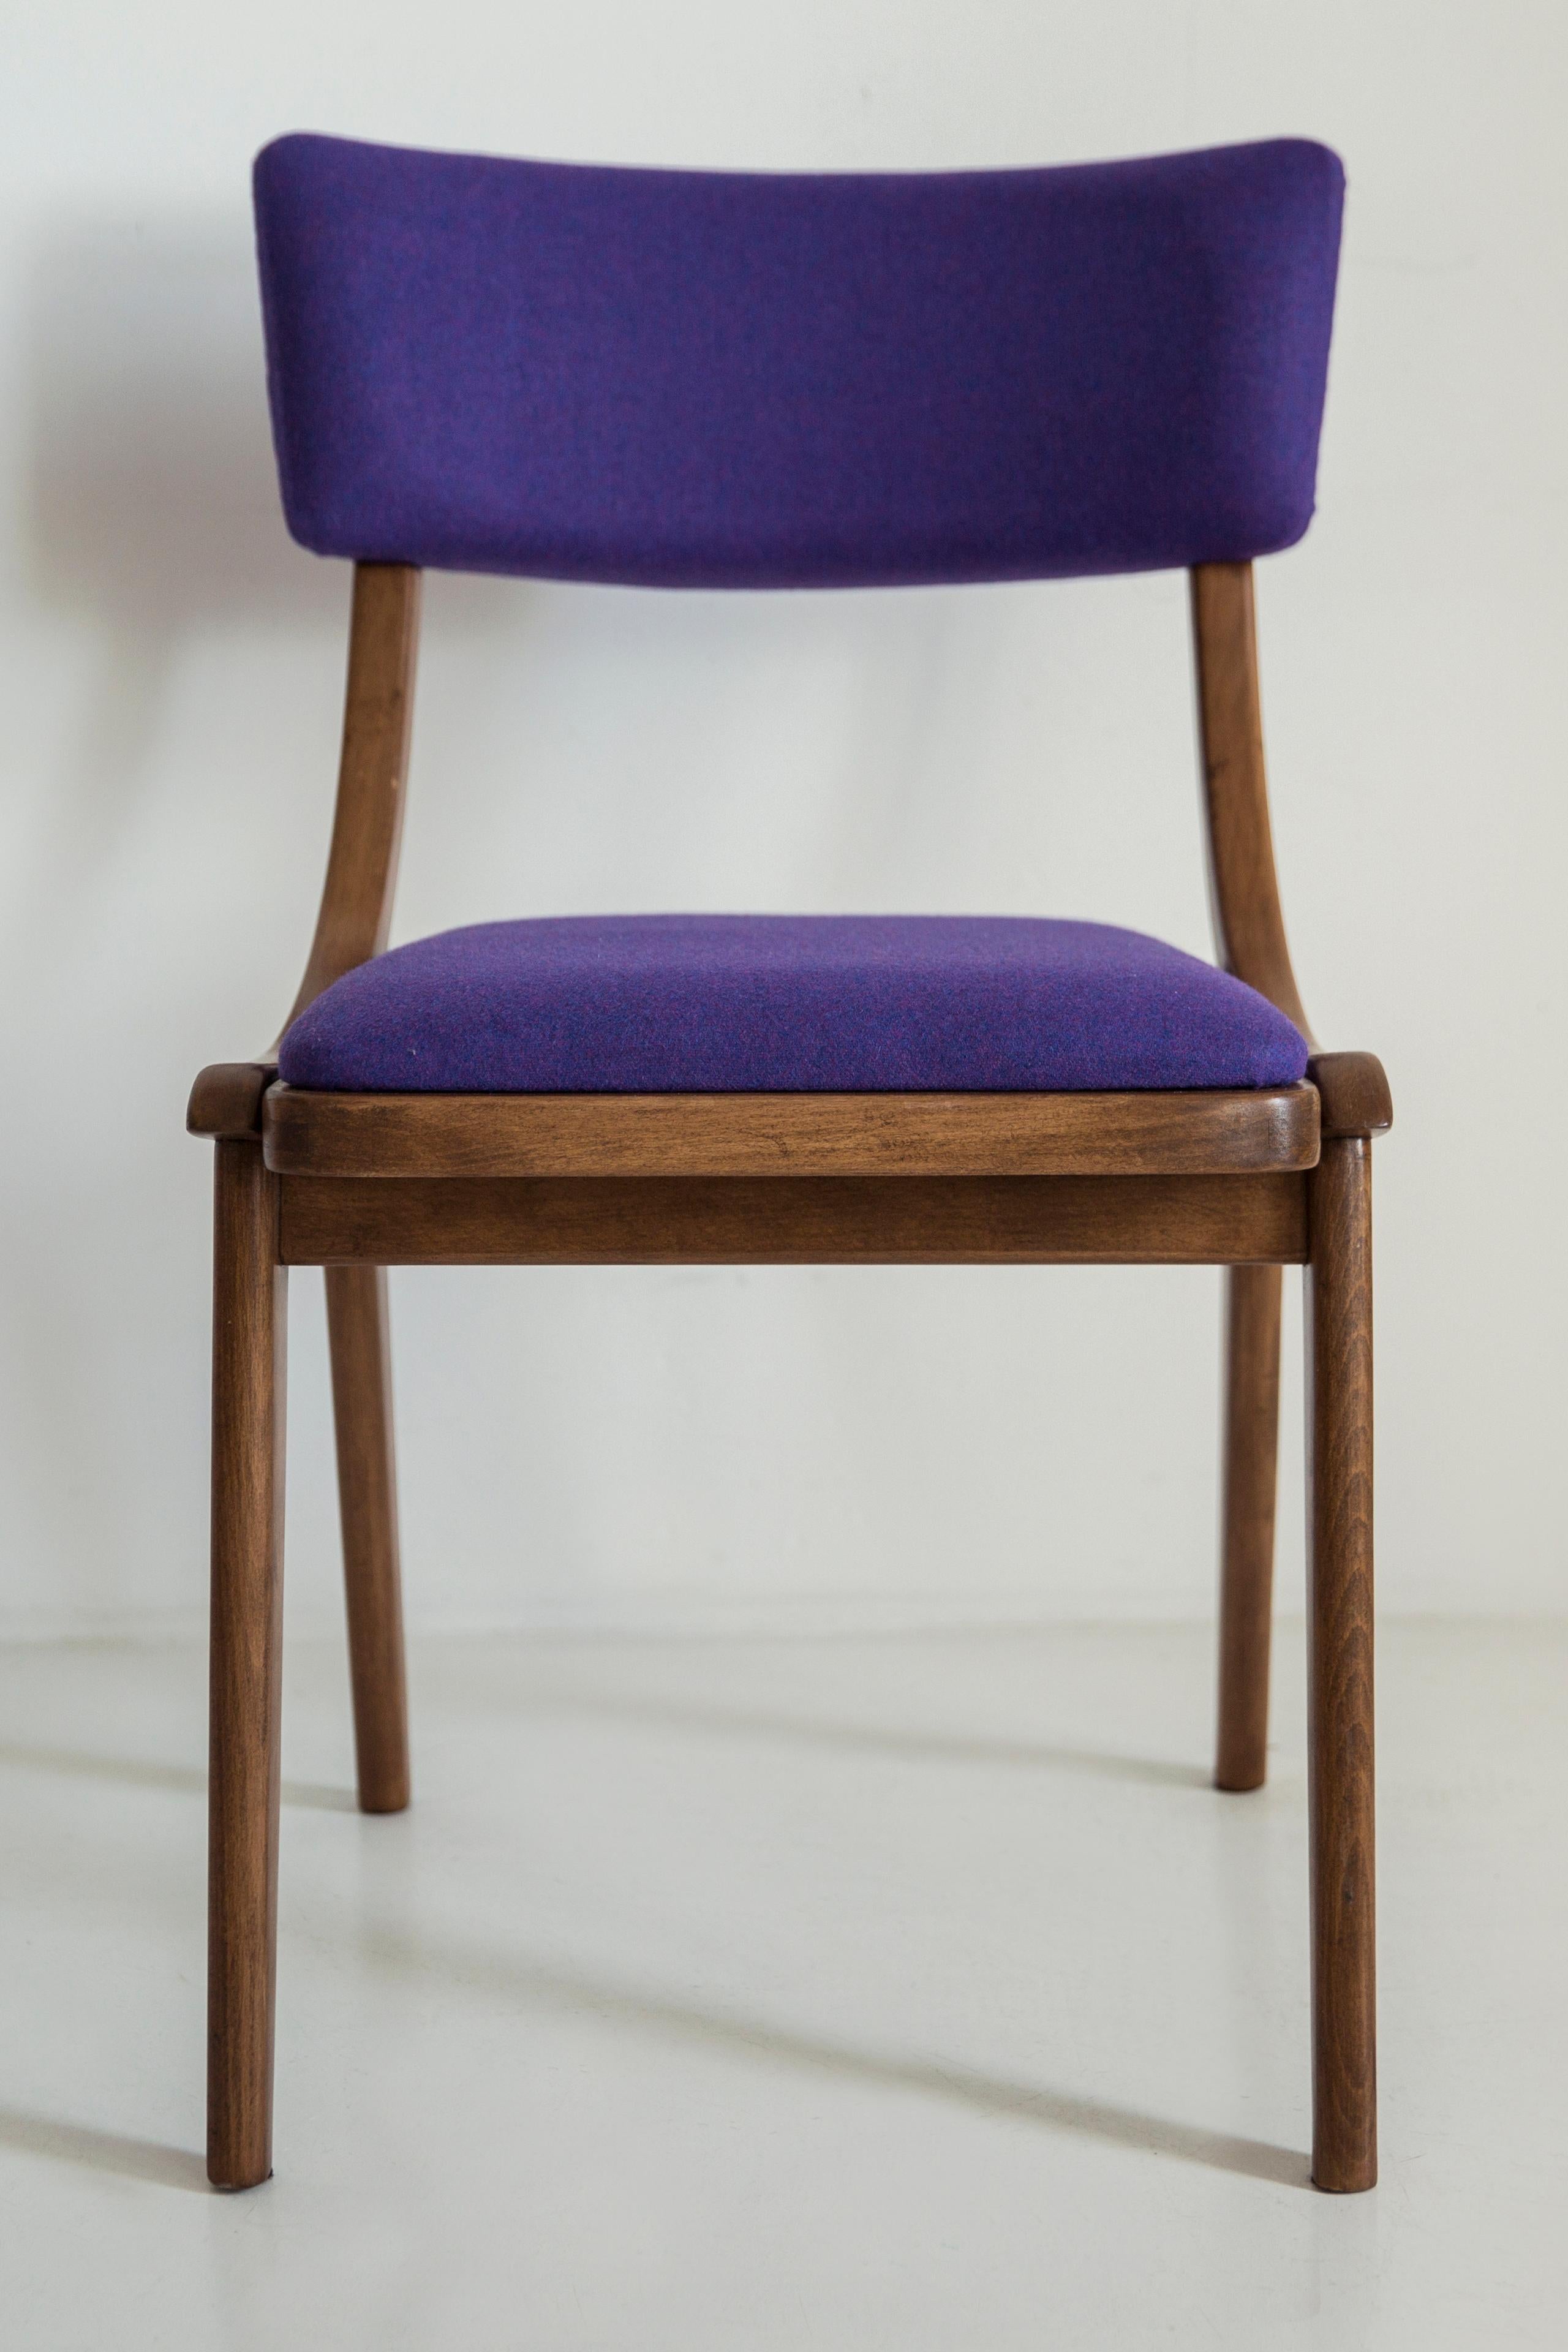 Hand-Crafted Six Mid Century Modern Bumerang Chairs, Purple Violet Wool, Poland, 1960s For Sale